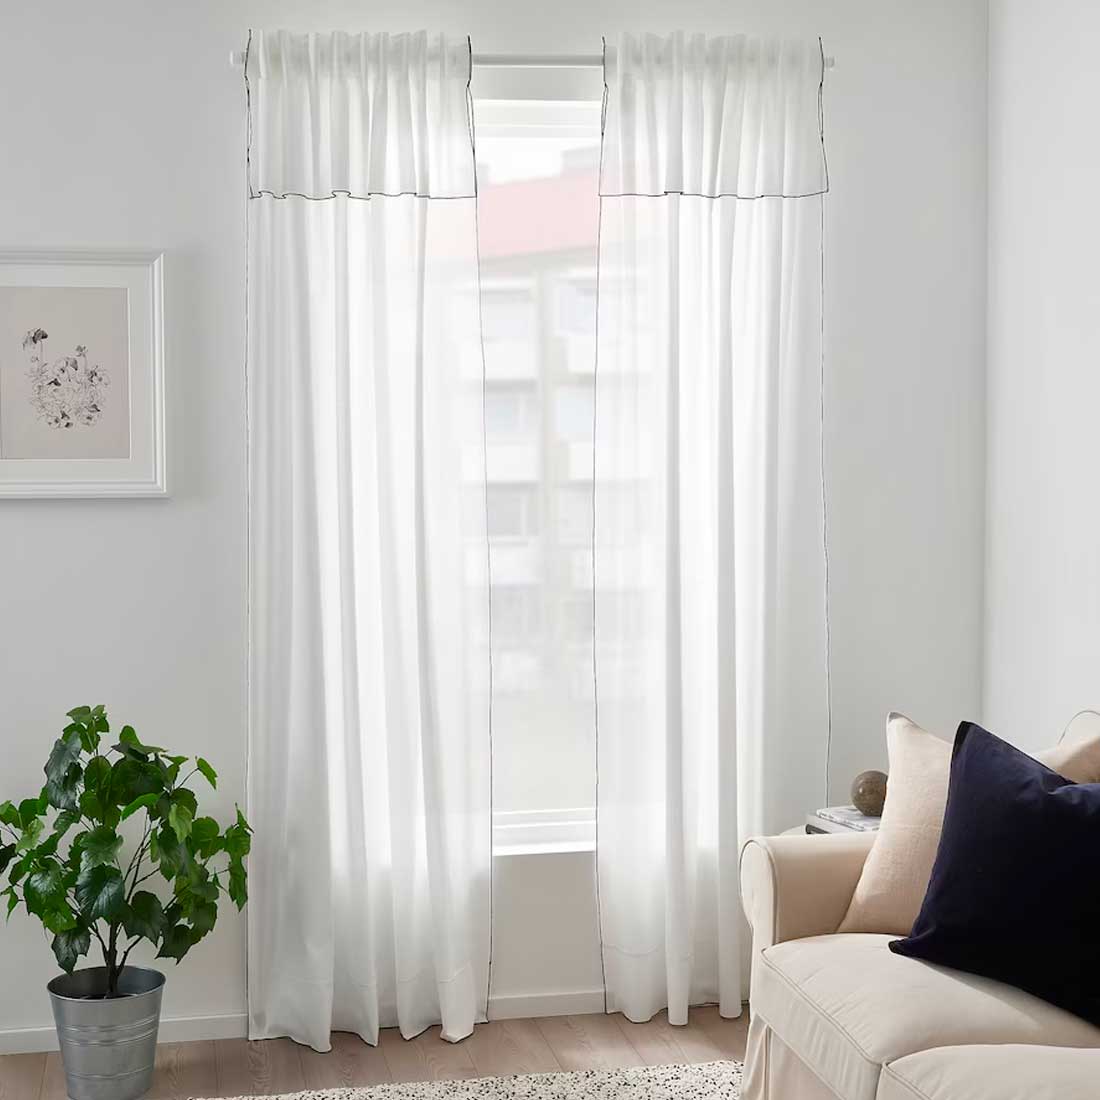 Moalisa curtains 1 pair pale